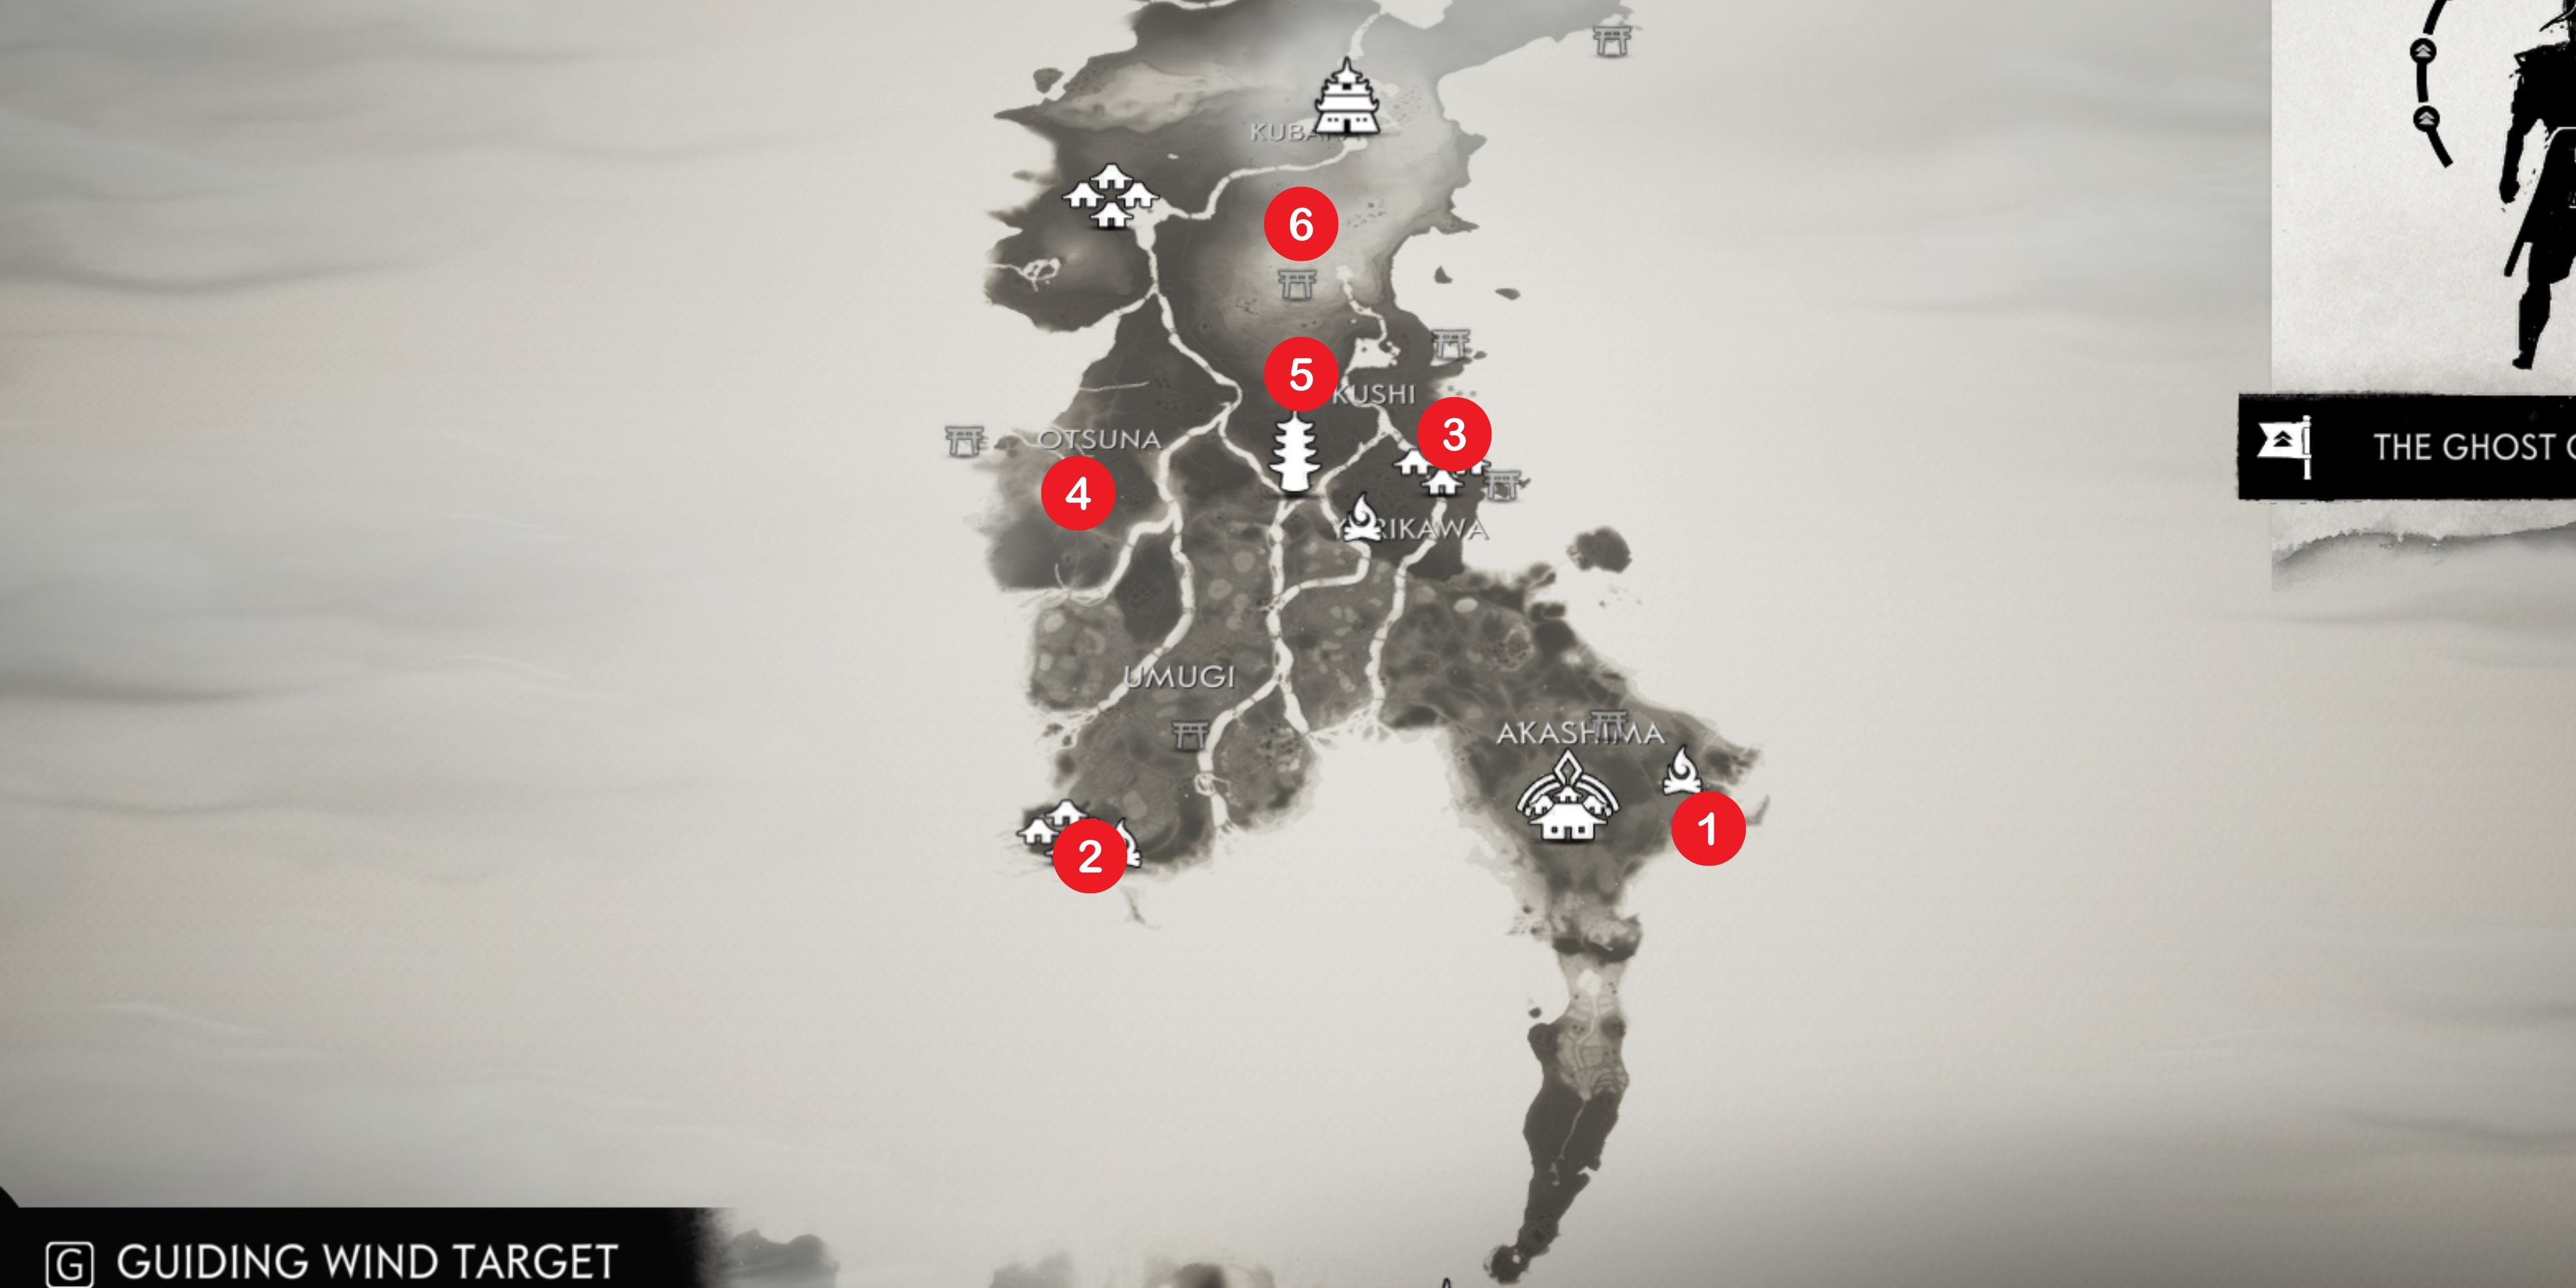 map showing all hot springs in toyotama in ghost of tsushima